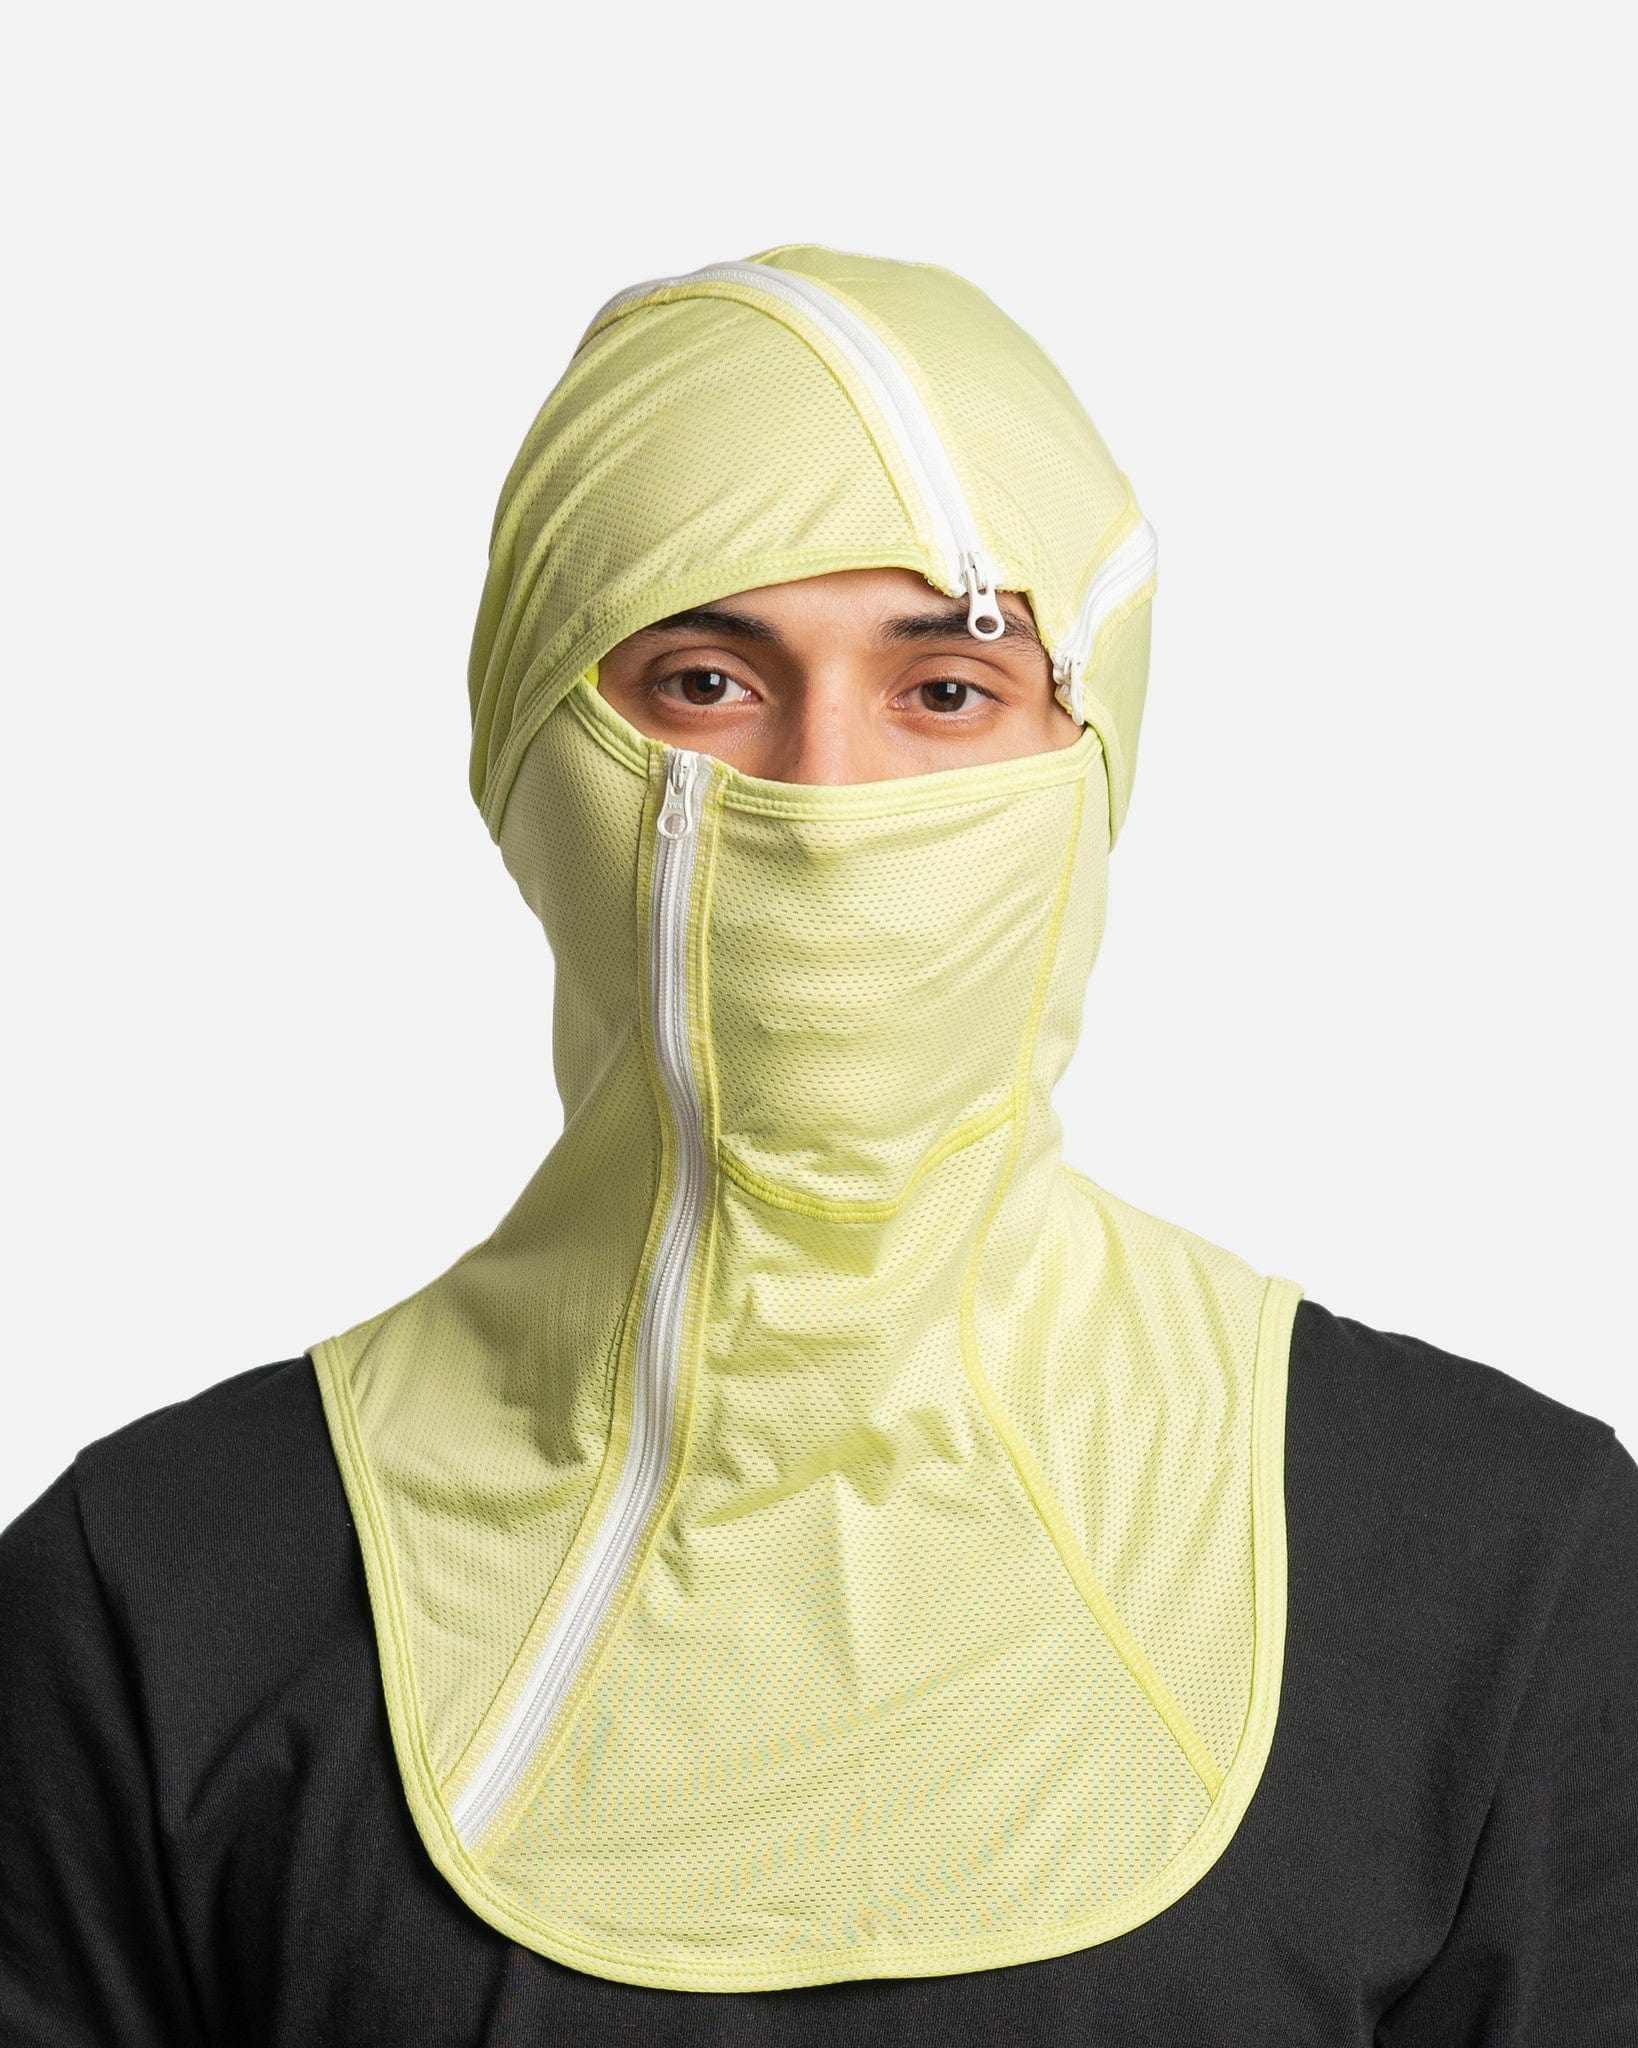 POST ARCHIVE FACTION (P.A.F) Men's Hats 5.0 Balaclava Center in Lime